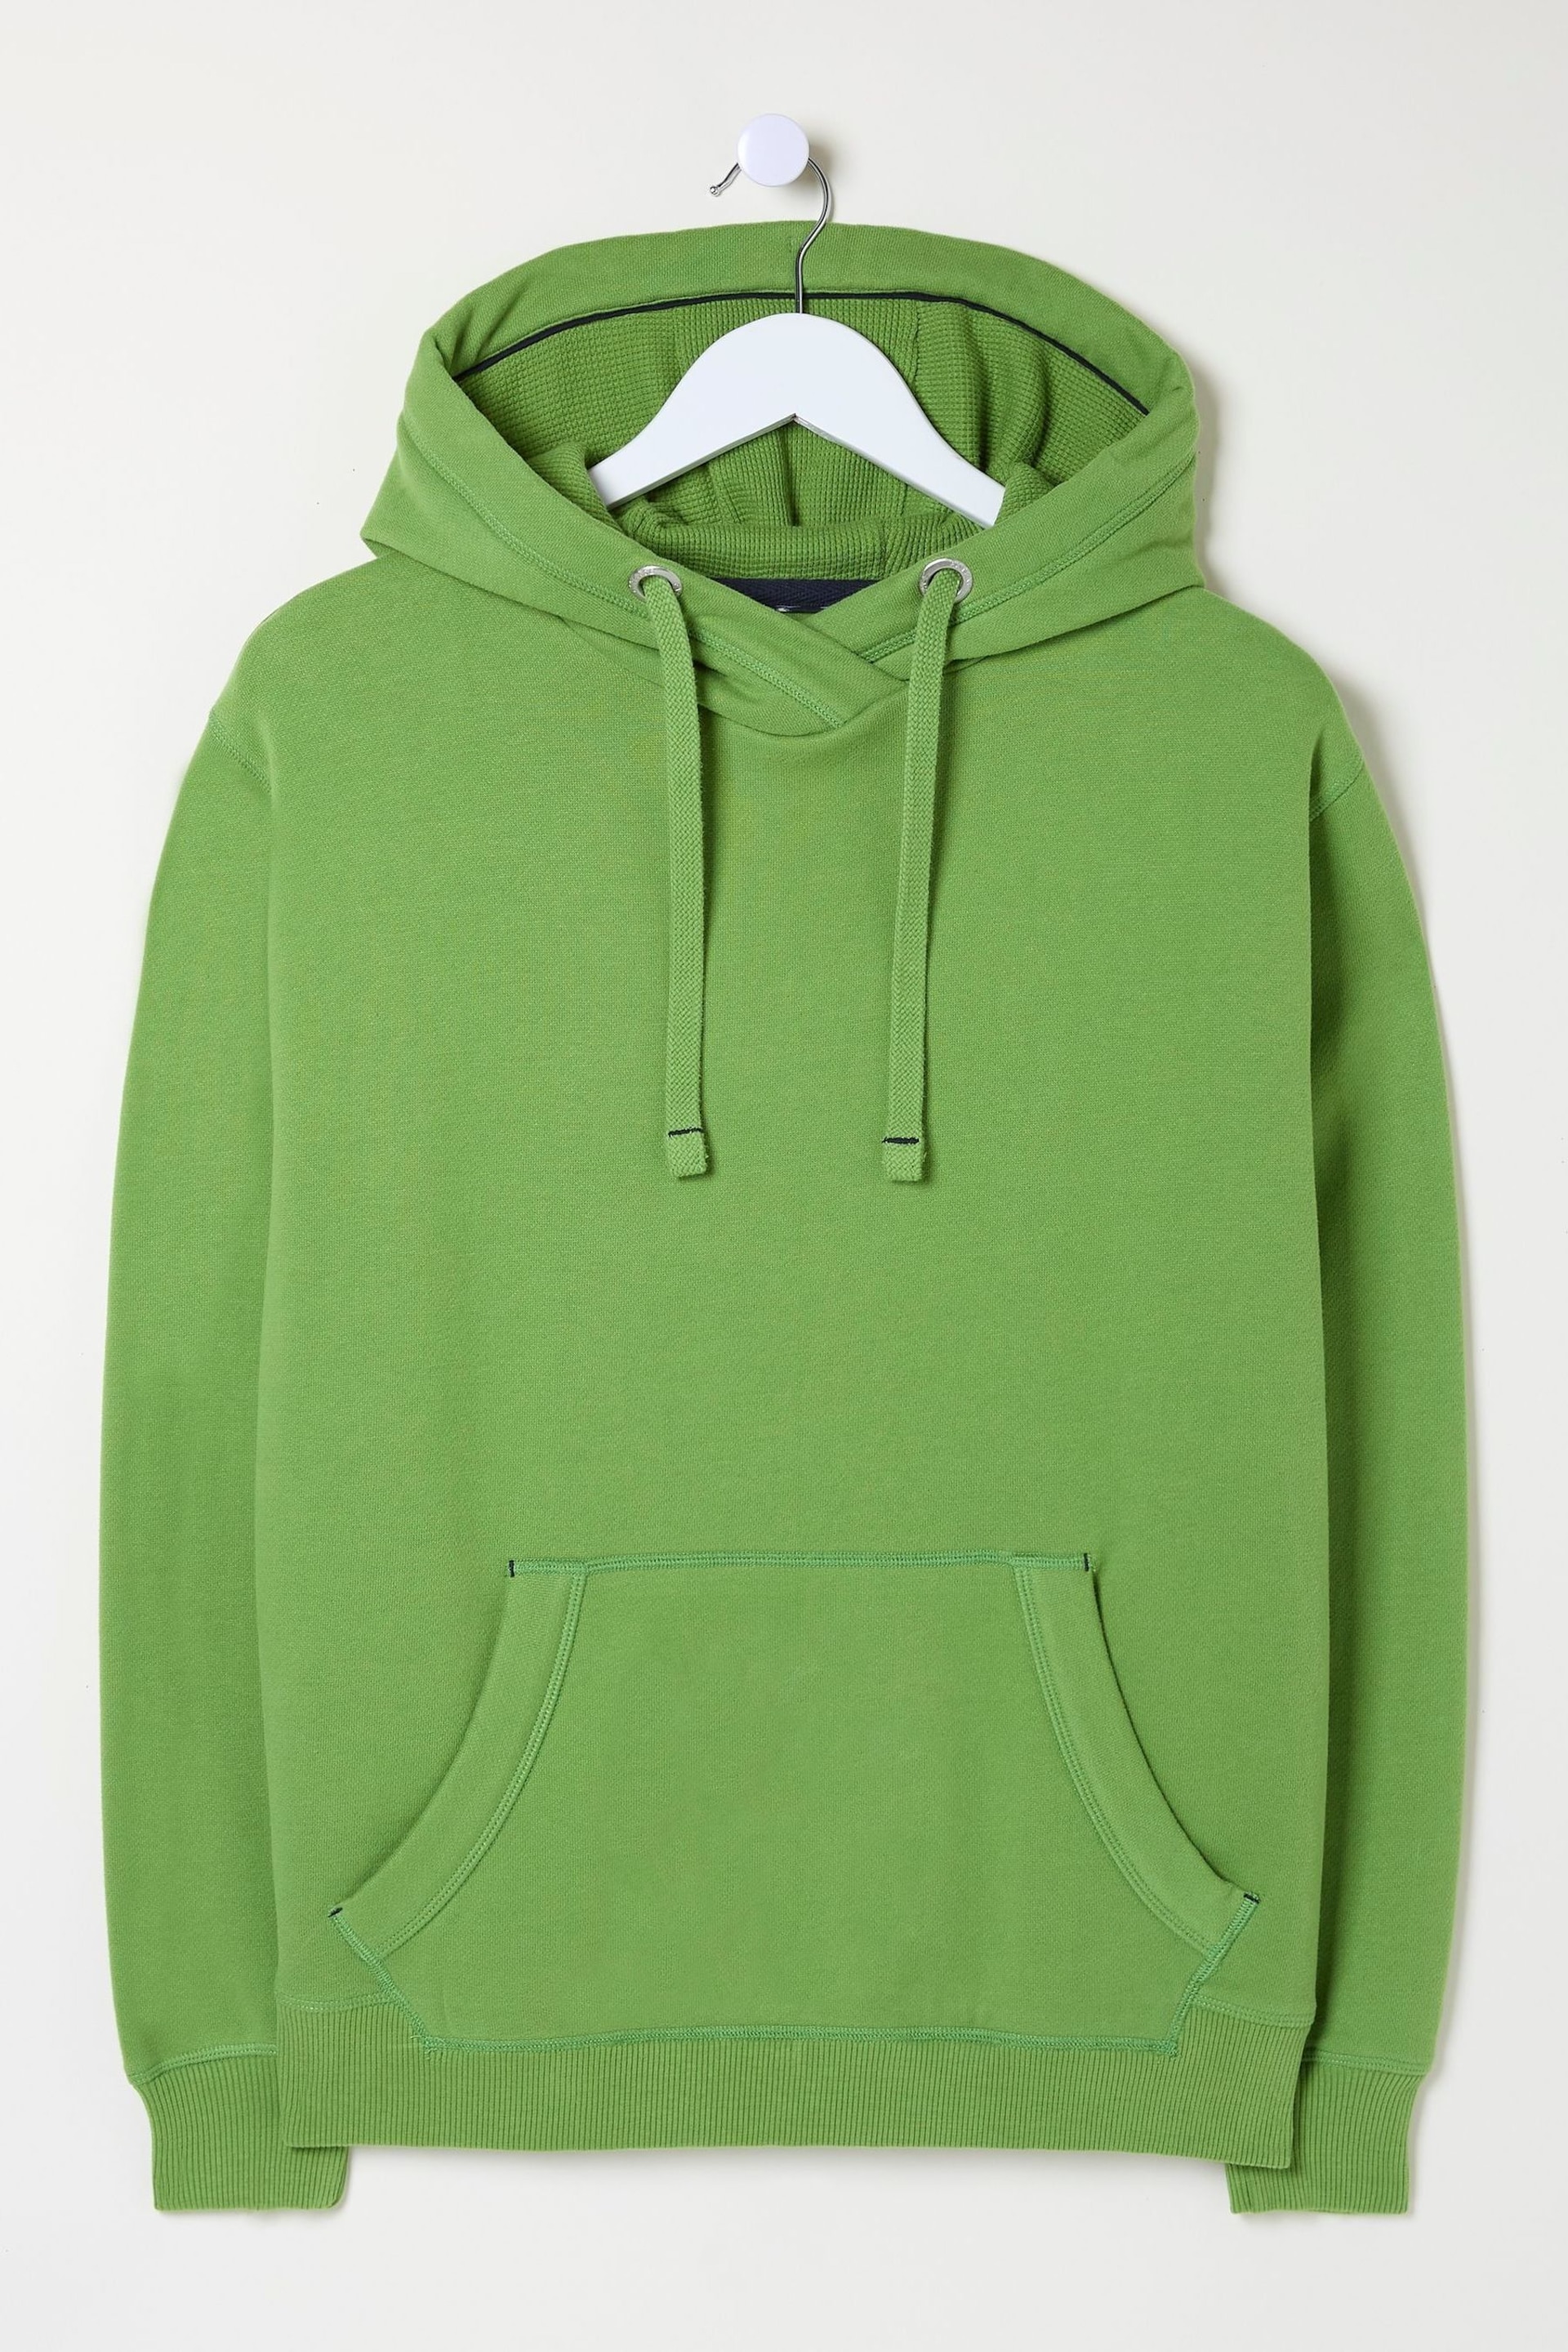 FatFace Green Izzy Overhead Hoodie - Image 4 of 4